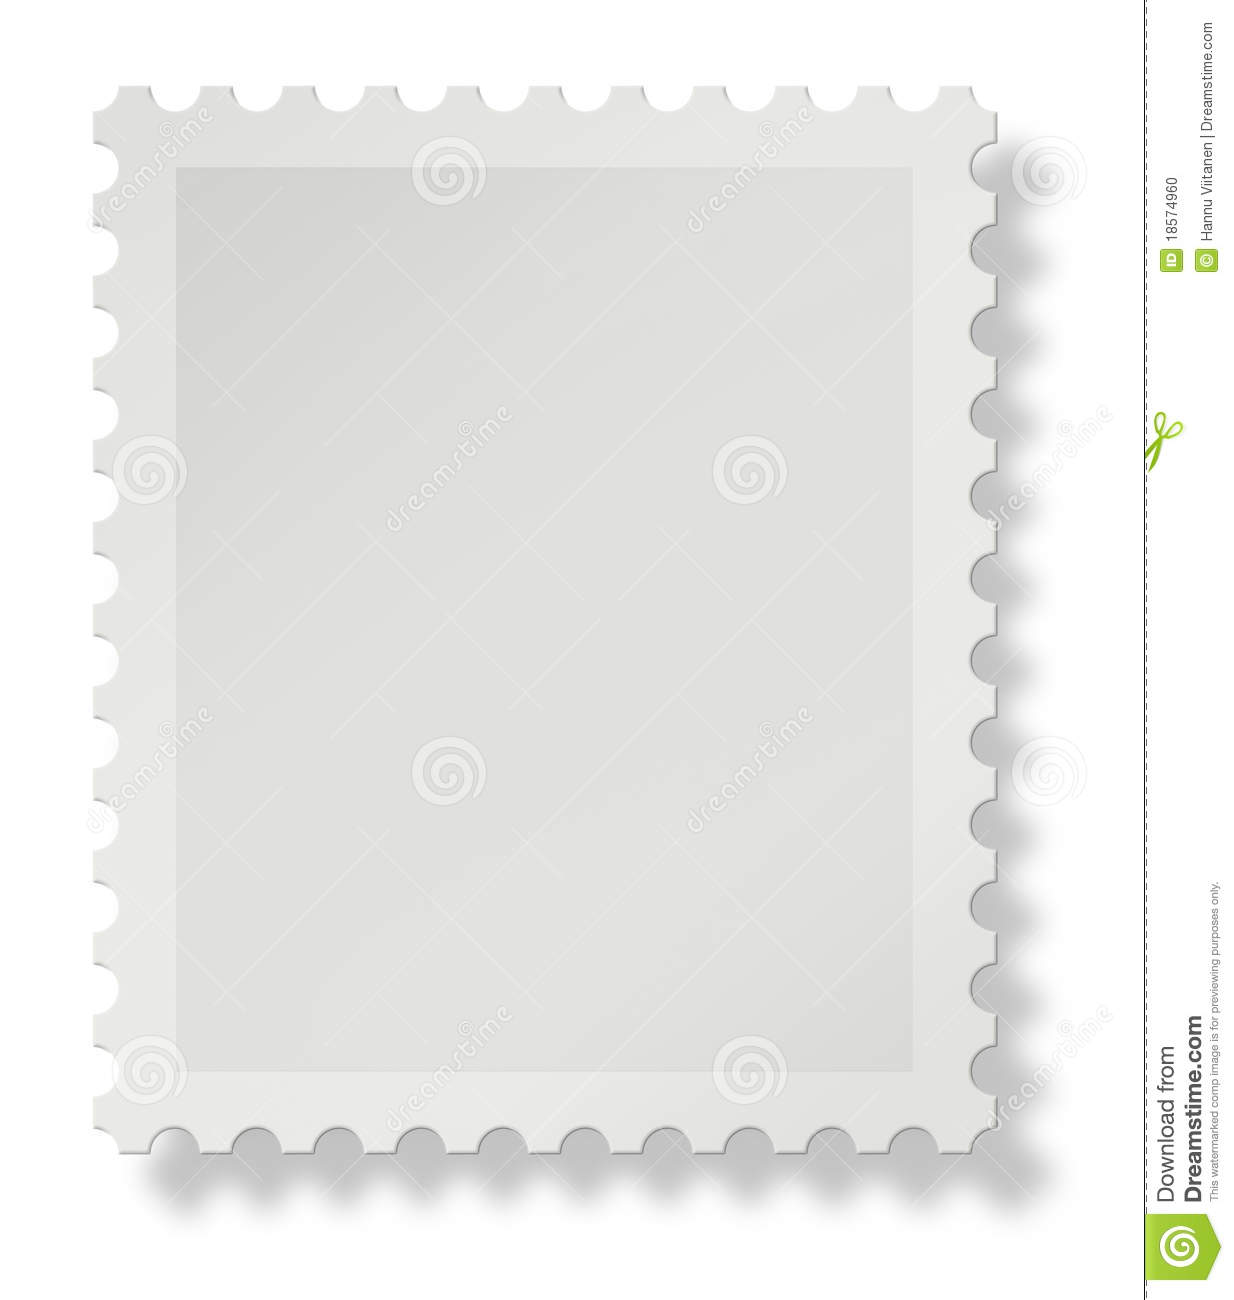 Blank Postal Stamp With Soft Shadow On White Background Add Your Own